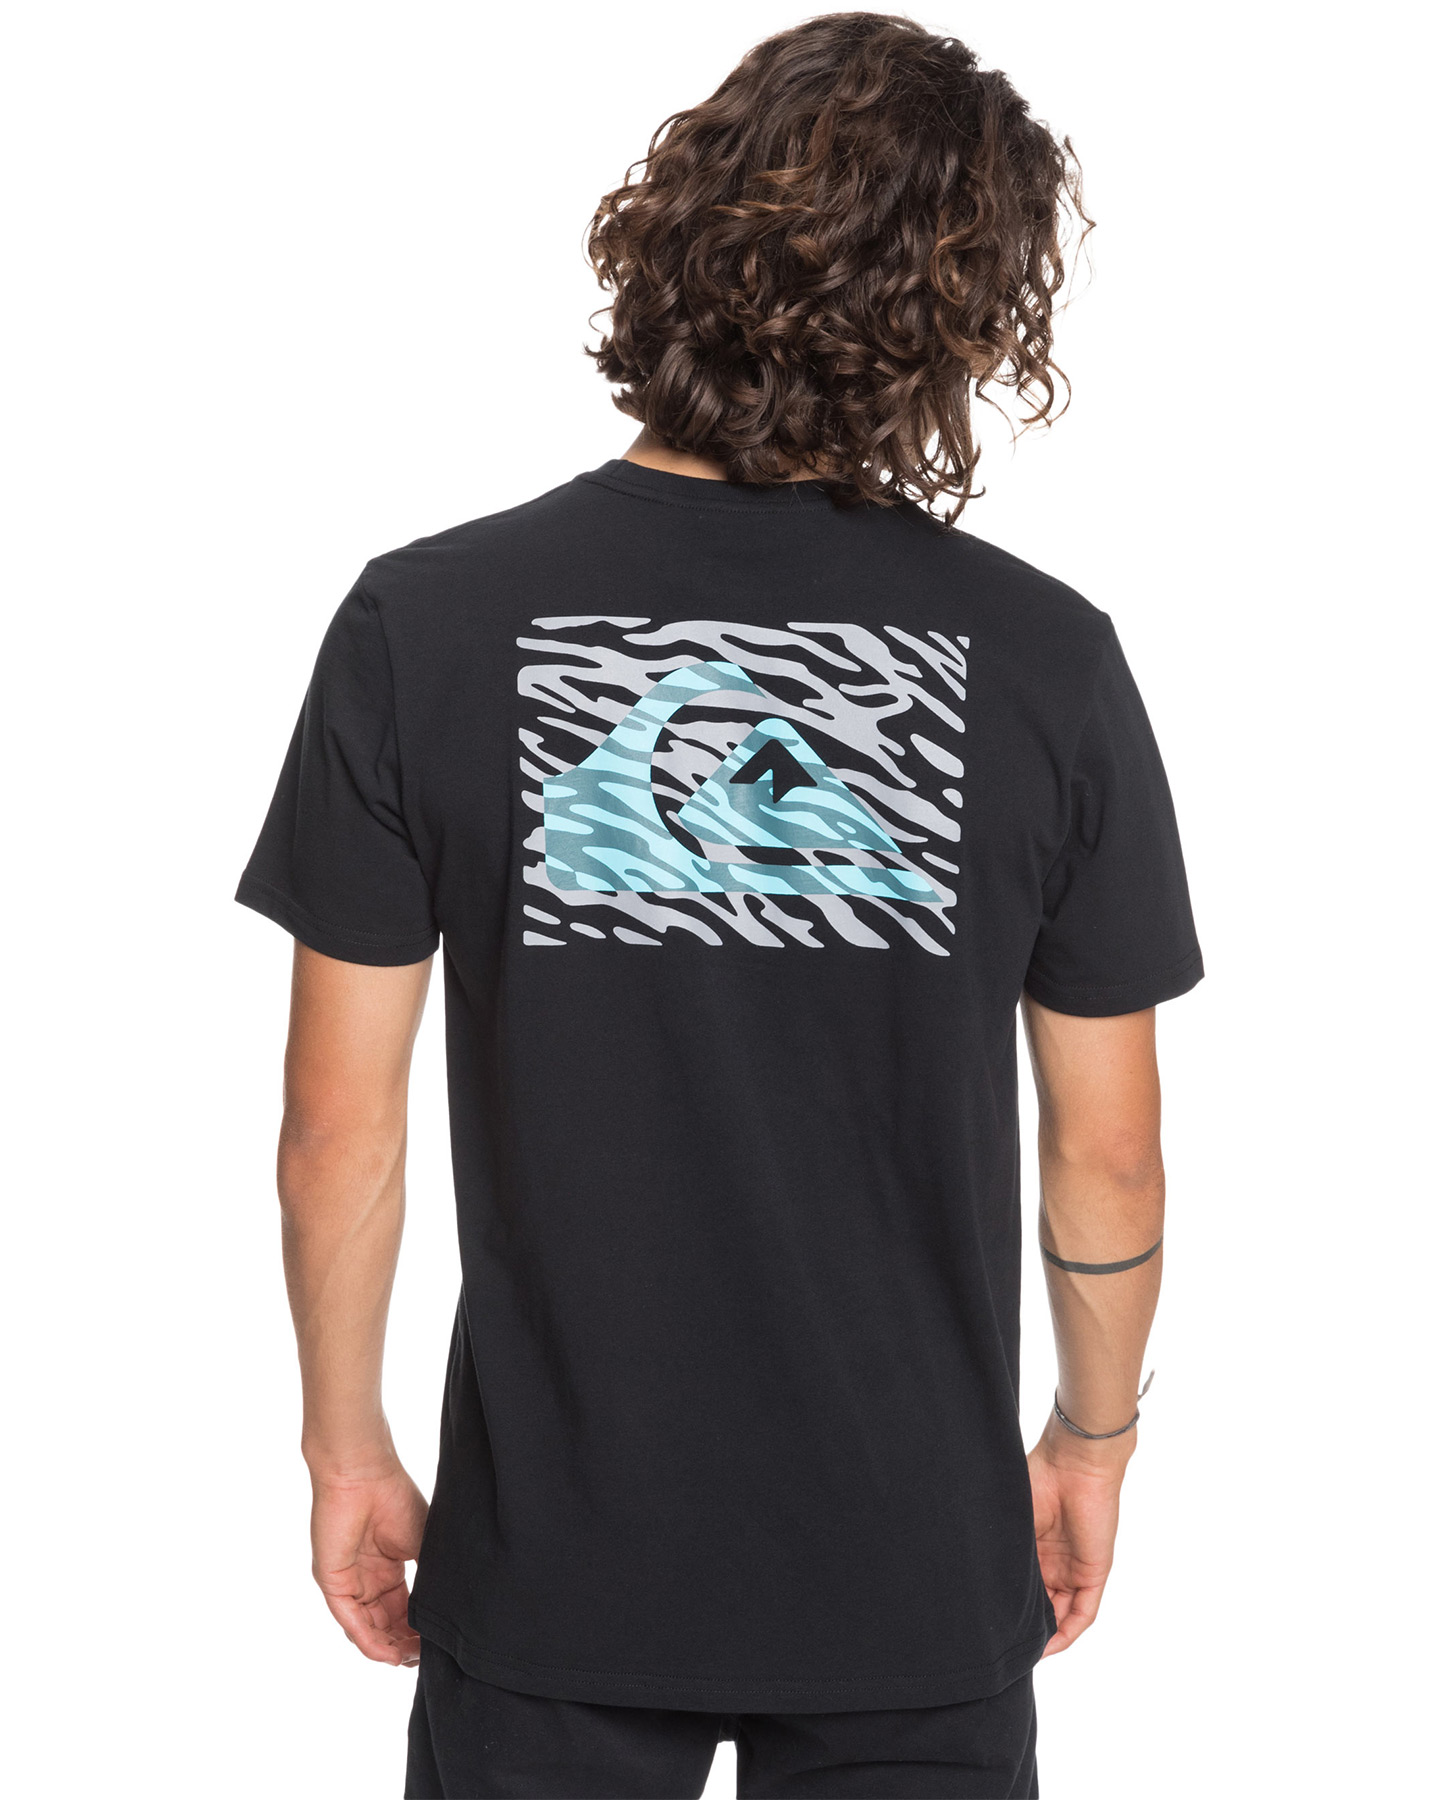 Quiksilver Mens New Take Tee - Black | SurfStitch